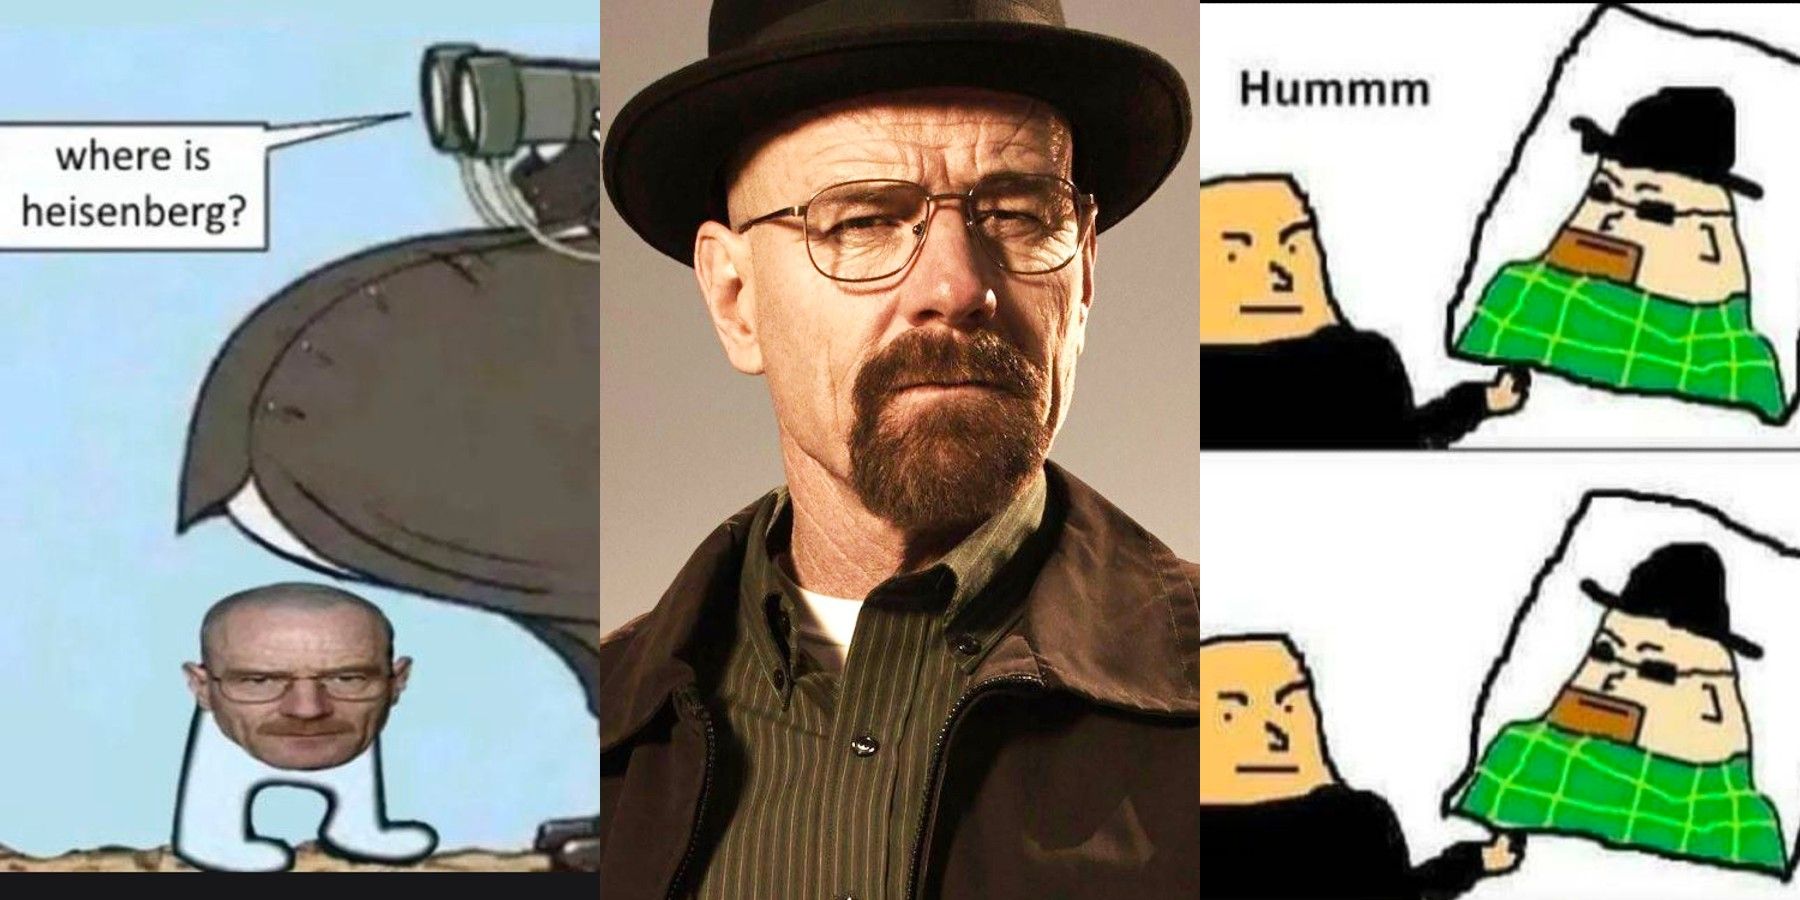 Who is the Walter White of anime? - Quora